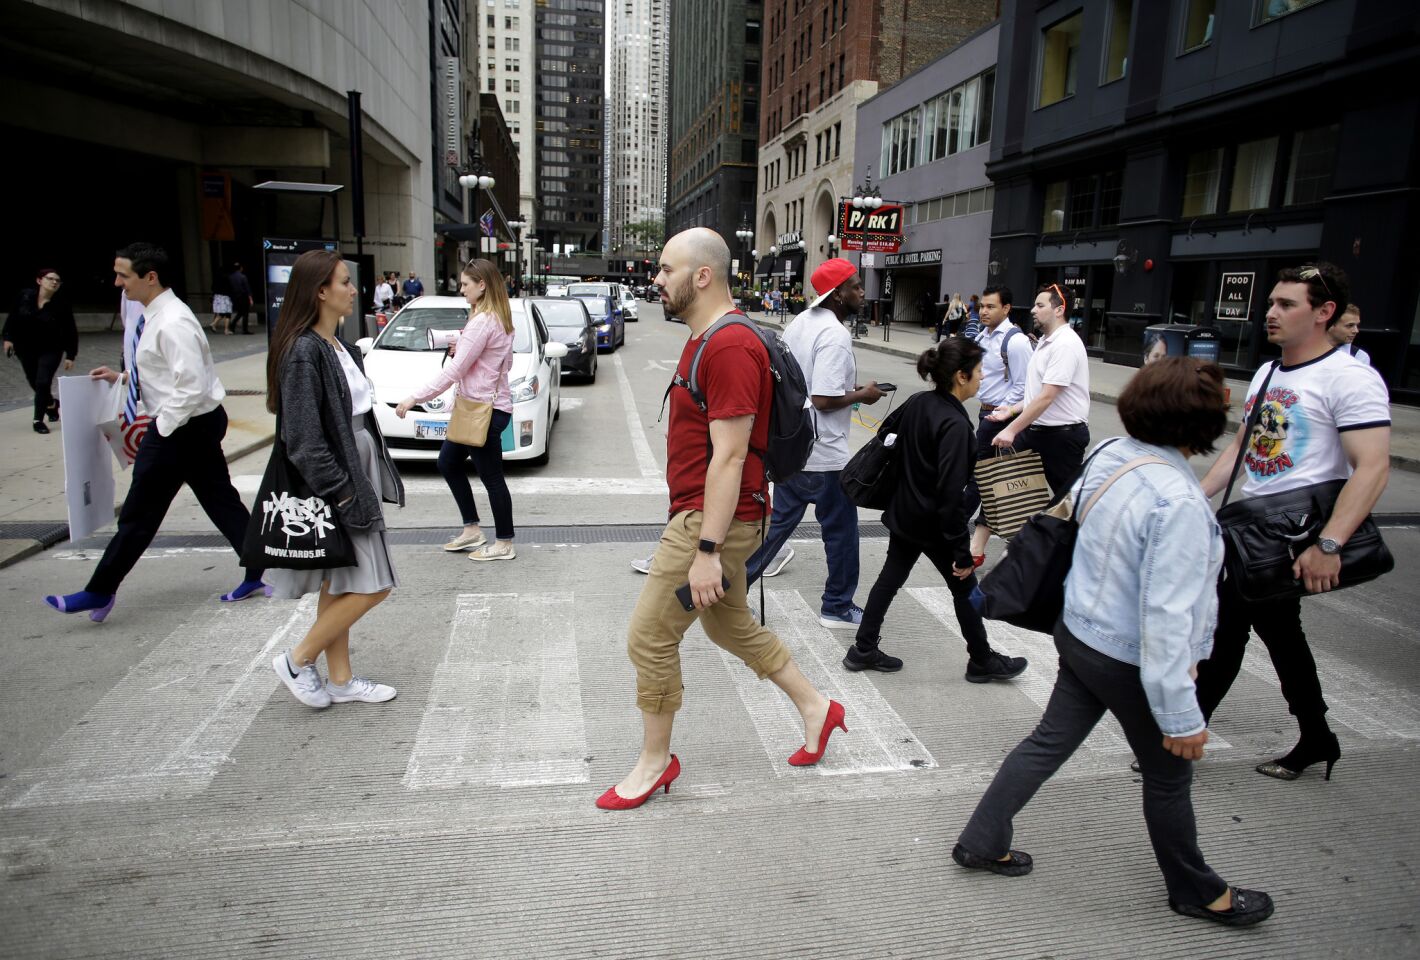 Chicago's Walk a Mile in Her Shoes